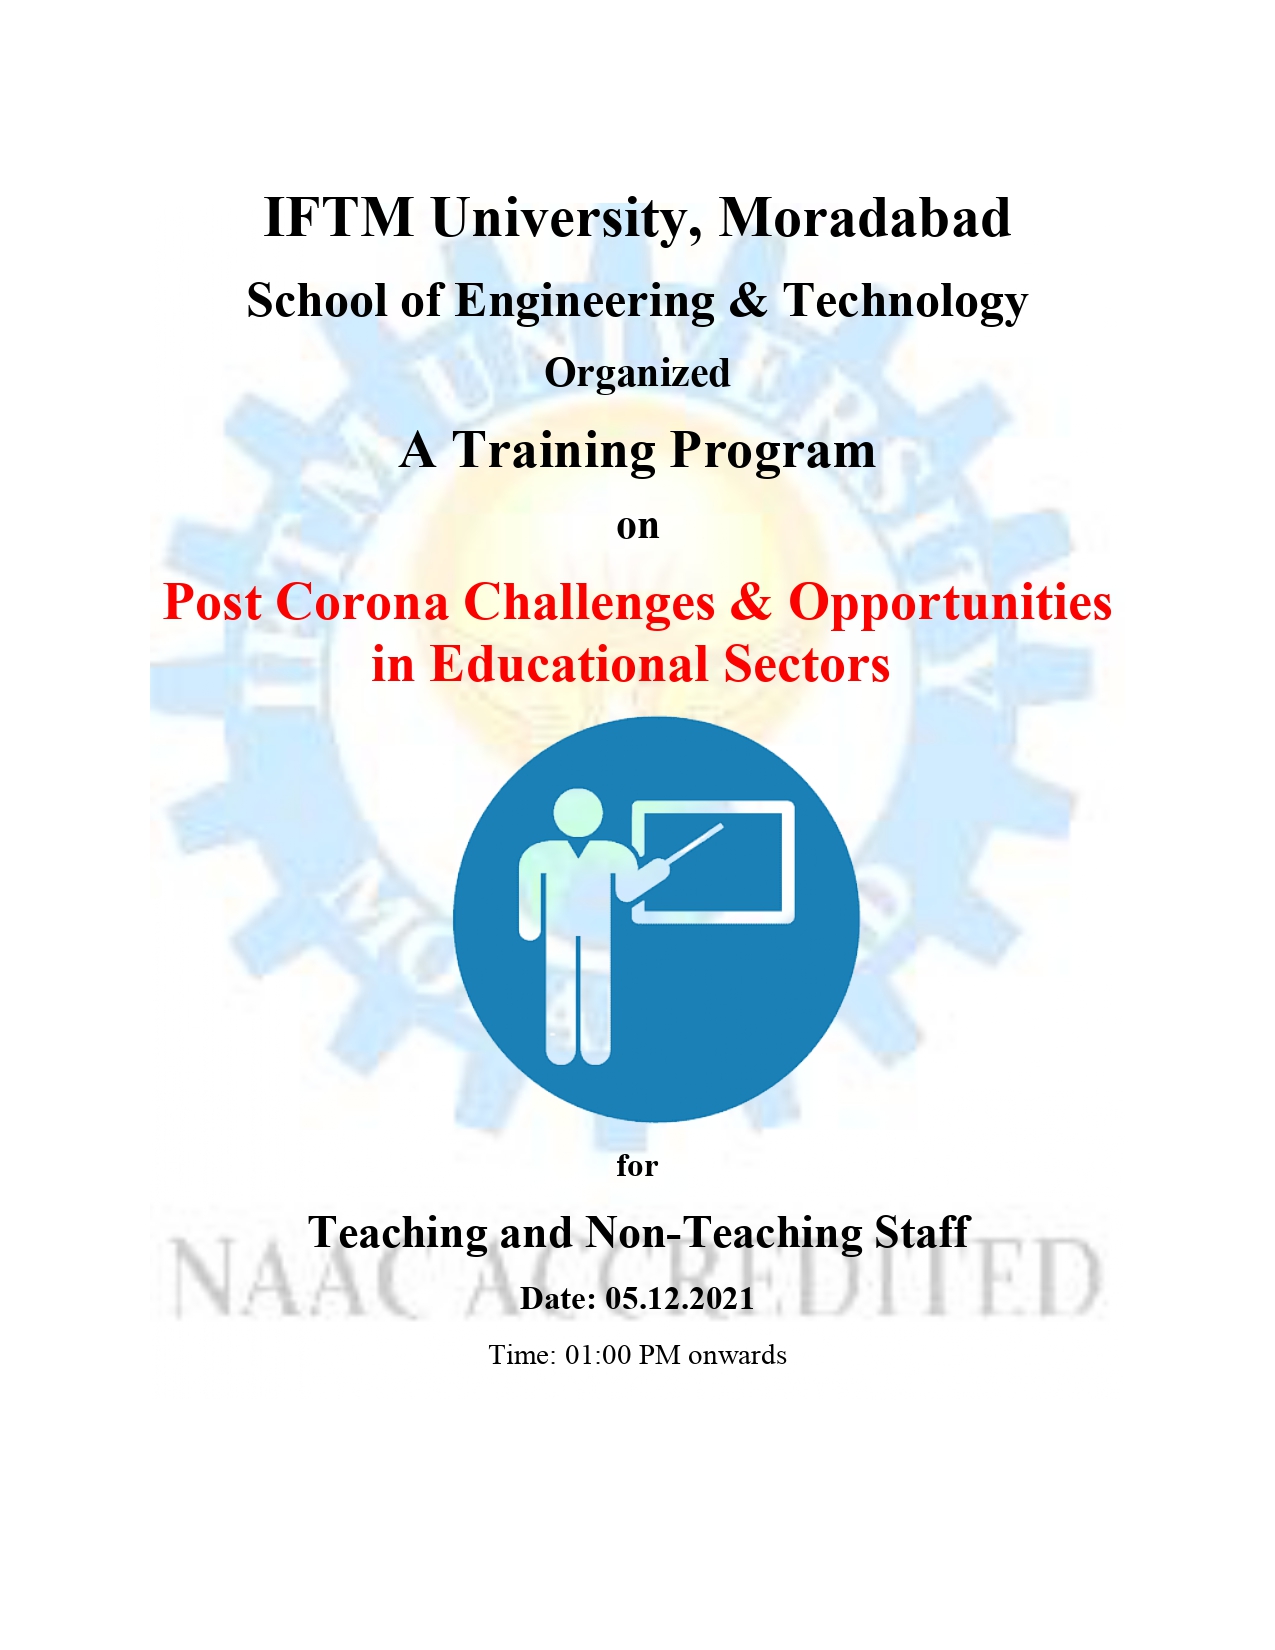 A Training programme on Post Corona challenges & Opportunities in Educational Sector for nonteaching staff